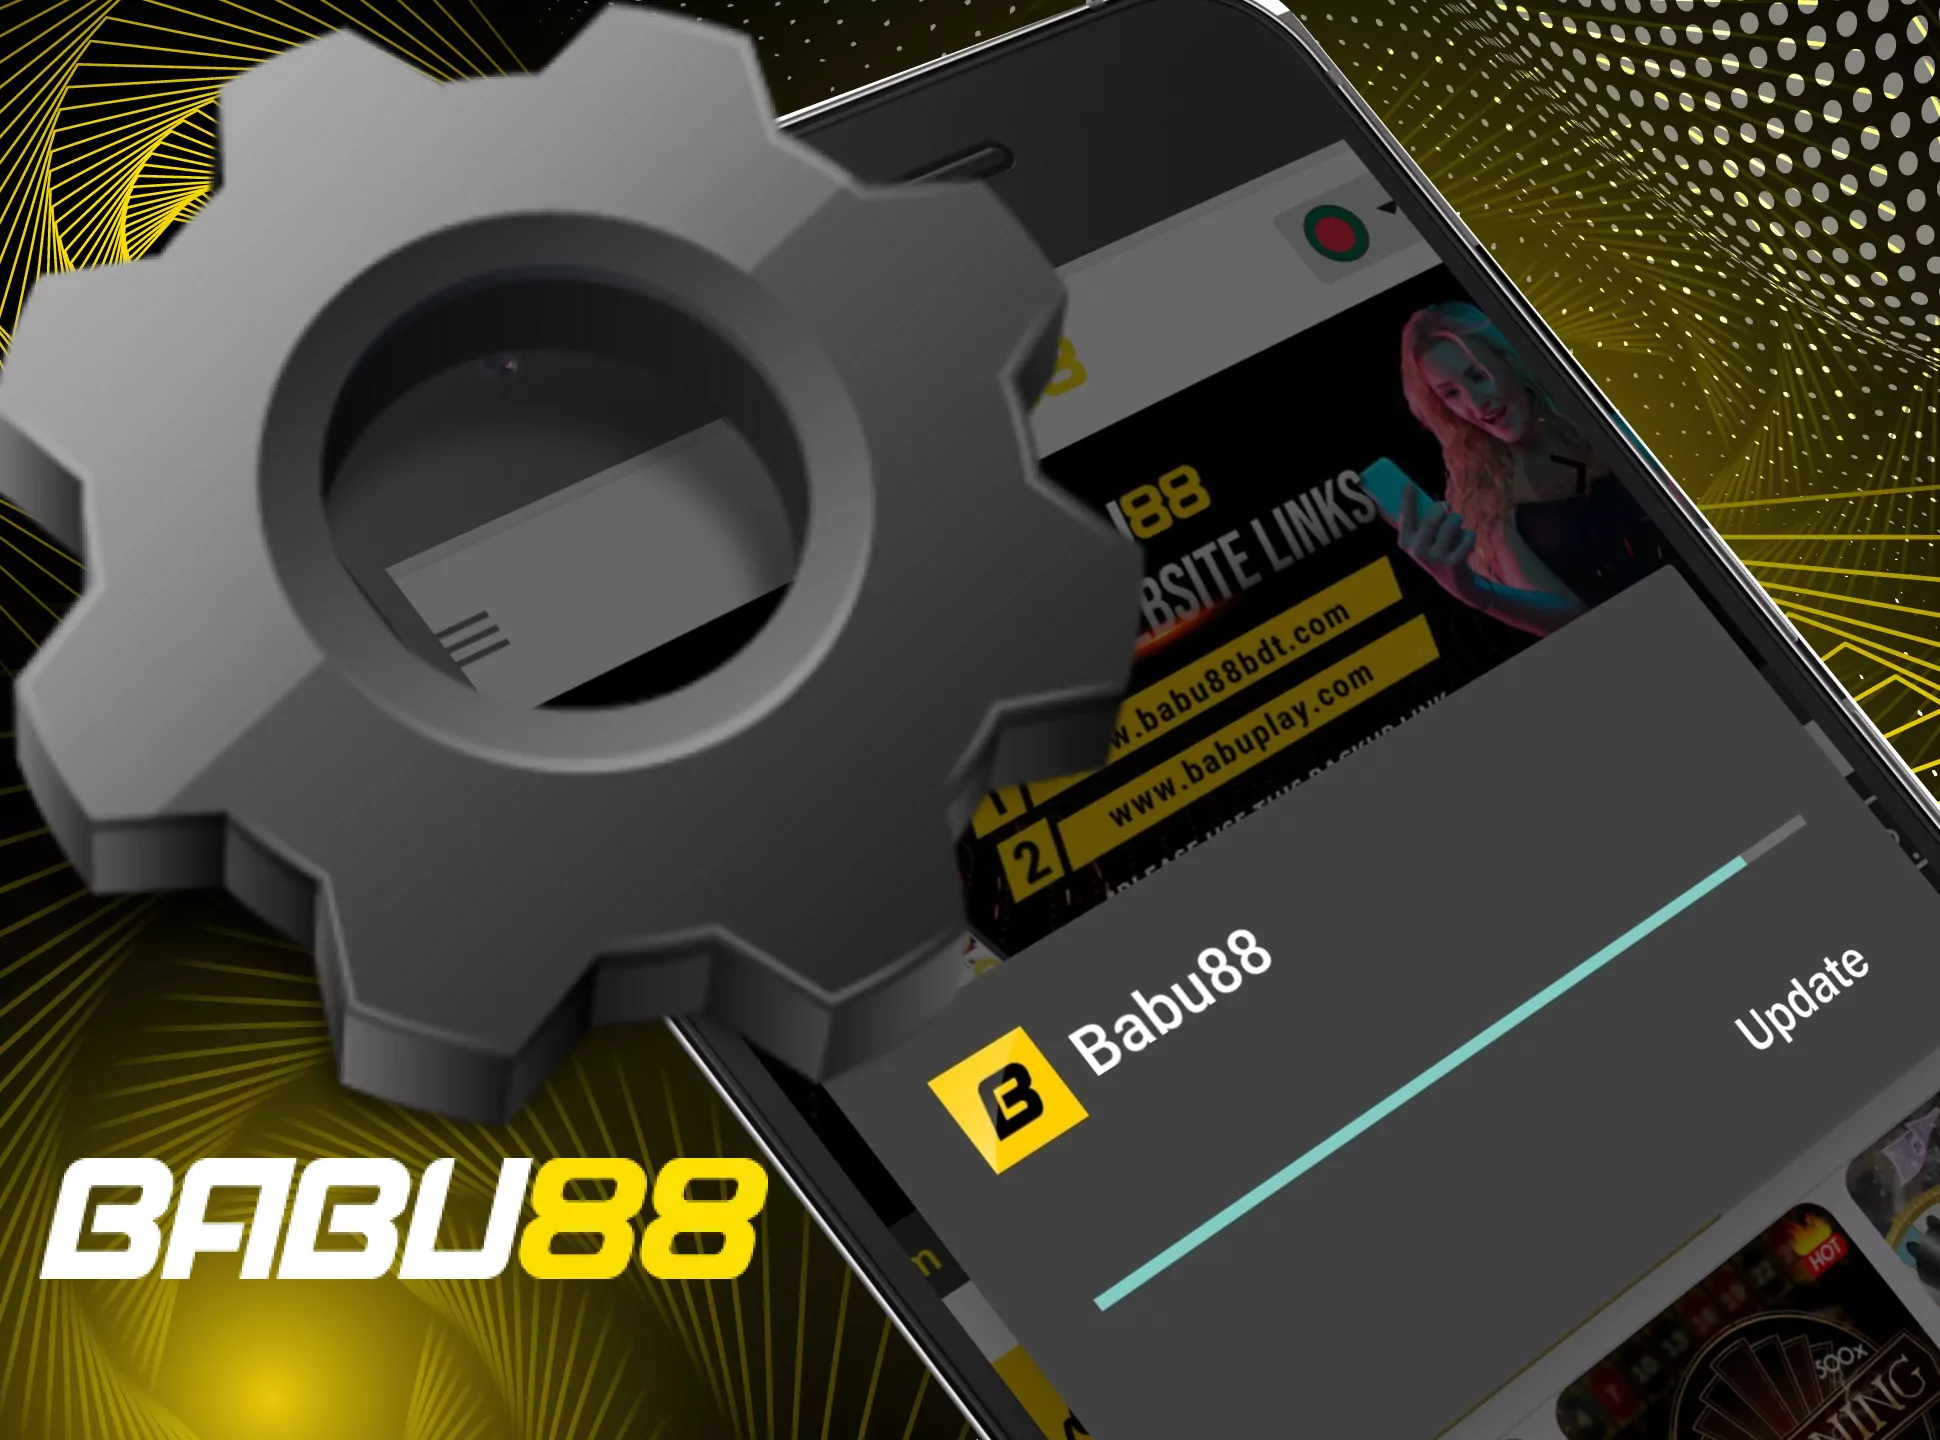 The Babu88 app can update automatically.